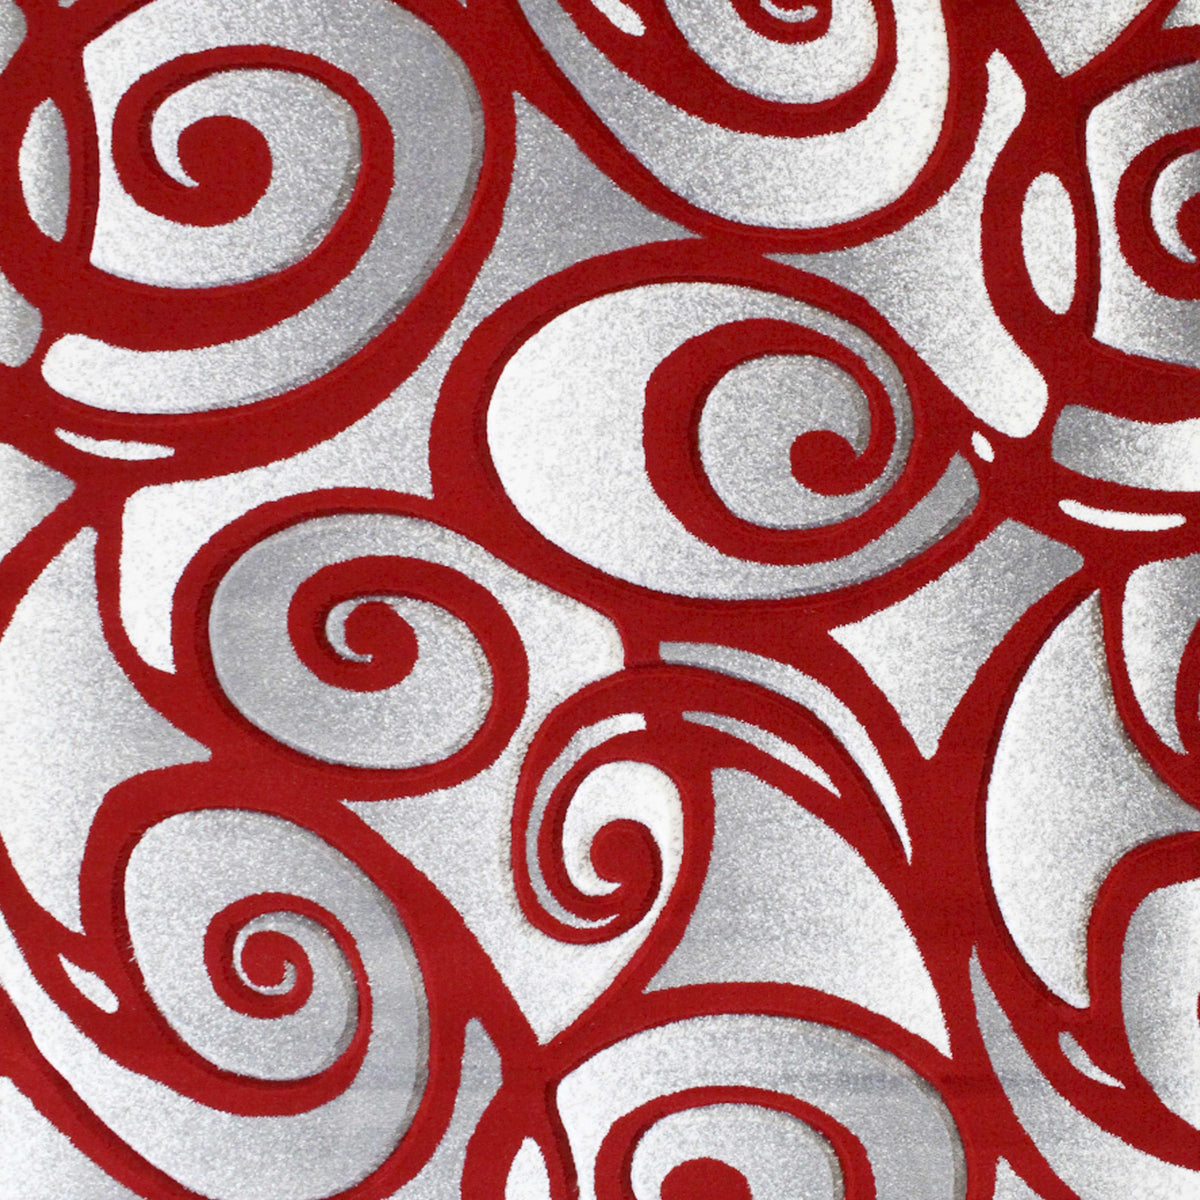 Red,8' x 10' |#| Swirled High-Low Pile Sculpted Multipurpose Area Rug in Red - 8' x 10'